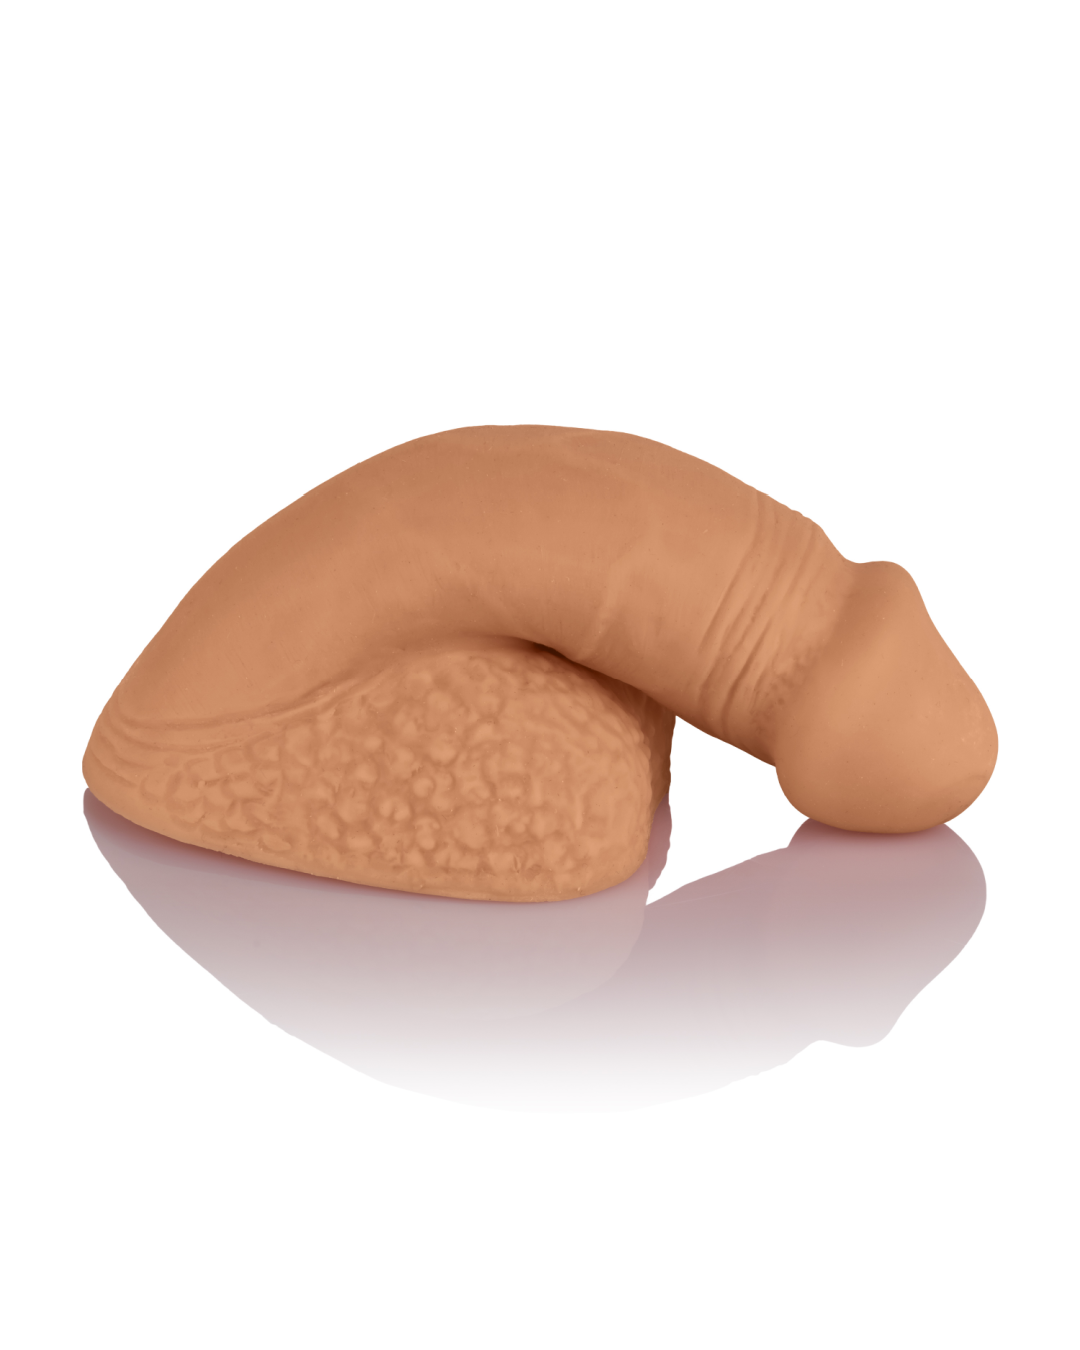 Packer Gear Silicone Packing Penis 4 Inch - Caramel